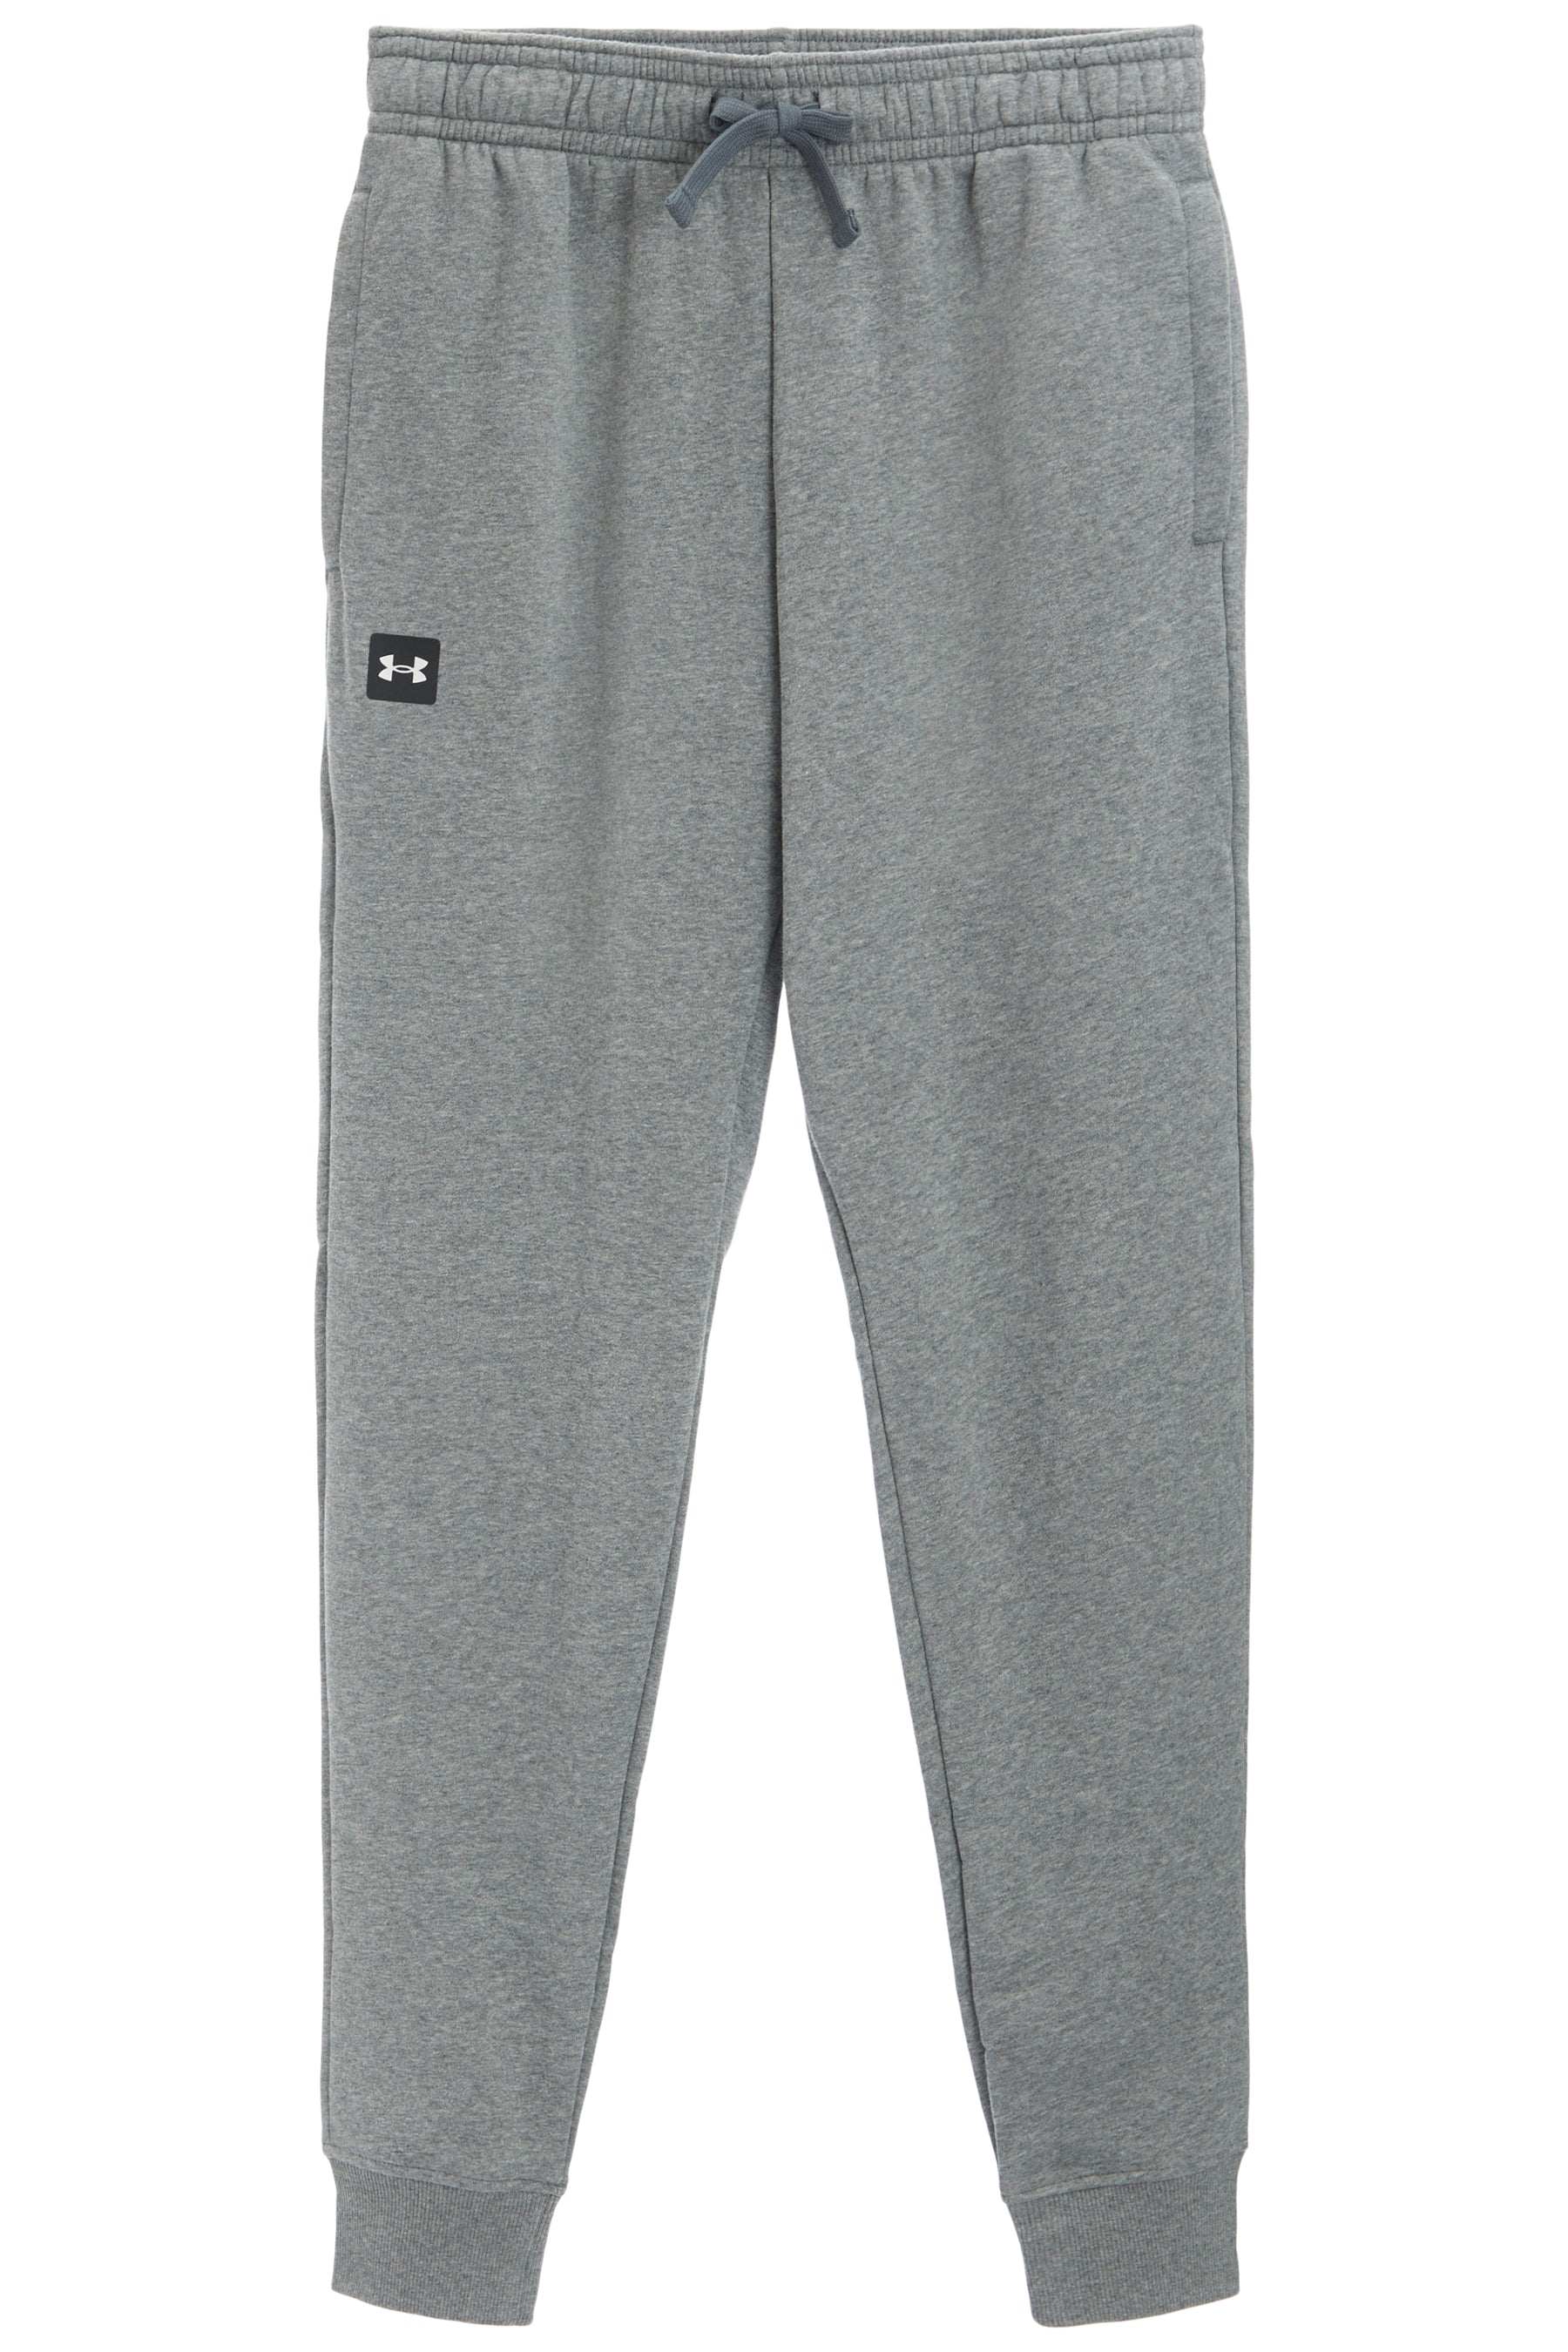 UA Rival Fleece Jogger in Pitch Gret